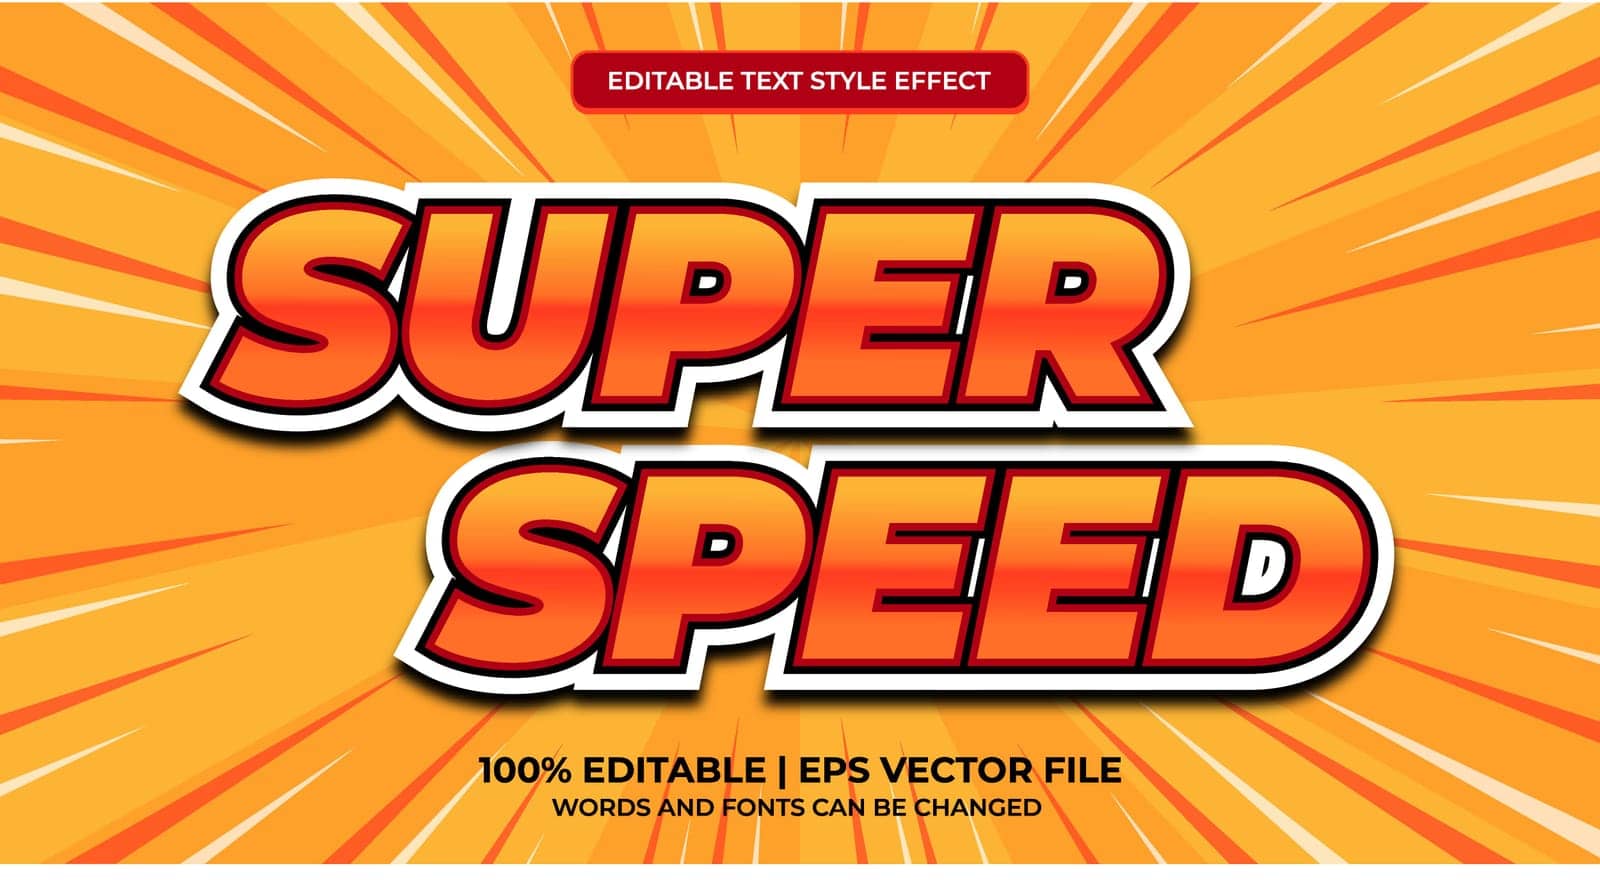 Super speed editable text effect in modern 3d style. Editable fast and sport text style by Aozora